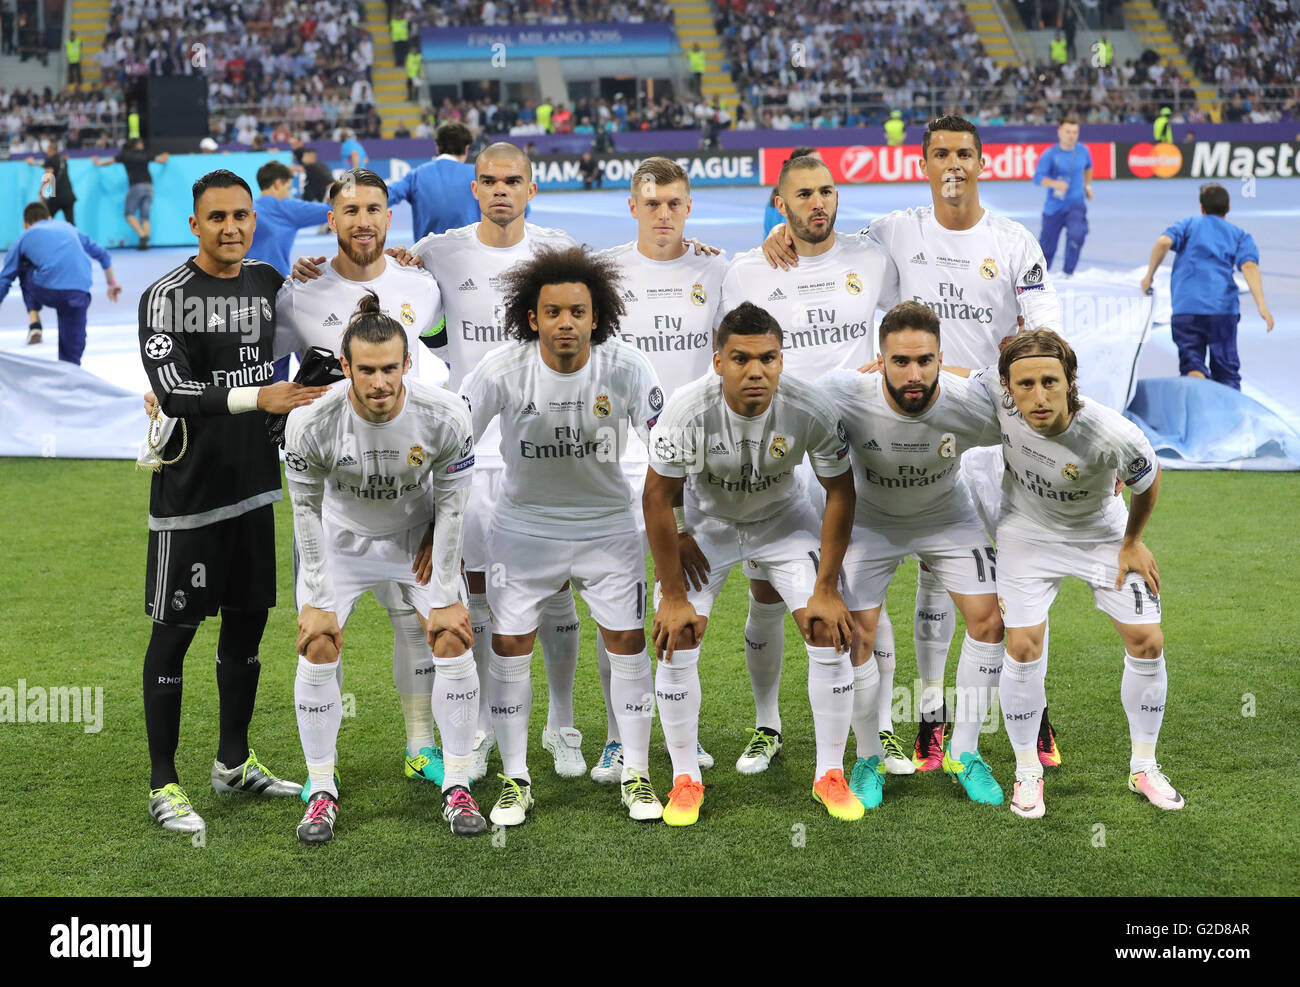 Milan, Italy. 28th May, 2016. Real's players (back, L-R) goalkeeper Keylor Navas, Sergio Ramos, Pepe, Toni Kroos, Karim Benzema, Cristiano Ronaldo, (front, L-R), Gareth Bale, Marcelo, Casemiro, Dani Carvajal, Luka Modric, pose for the team photo before the UEFA Champions League Final between Real Madrid and Atletico Madrid at the Stadio Giuseppe Meazza in Milan, Italy, 28 May 2016. Photo: Christian Charisius/dpa /dpa/Alamy Live News Stock Photo